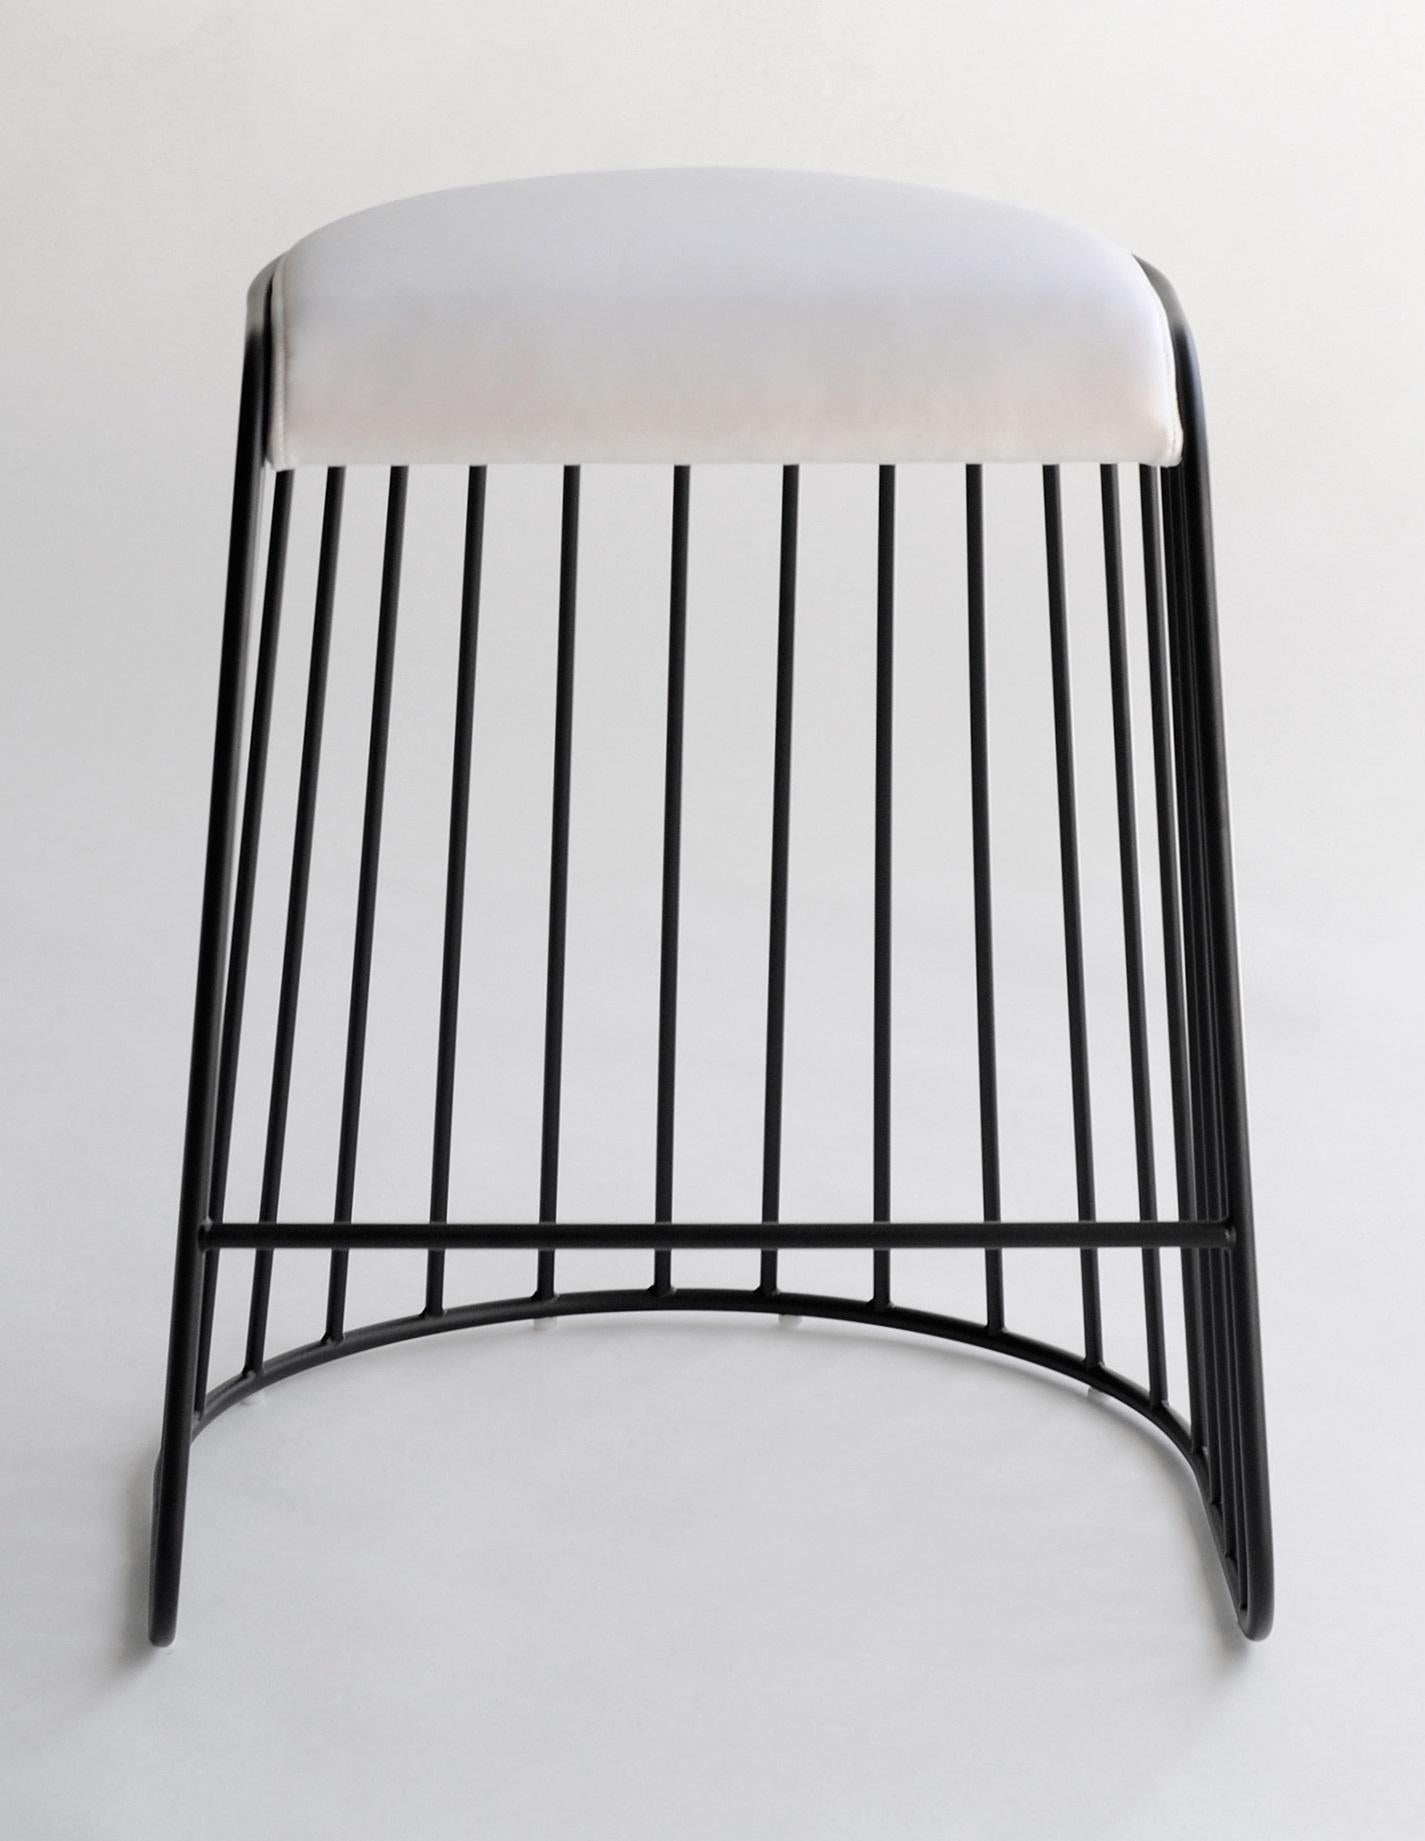 Bride’s Veil Counter Stool by Phase Design
Dimensions: D 52,1 x W 53,3 x H 63,5 cm.
Materials: Leather and powder-coated steel.

Solid steel bar available in a smoked brass, polished chrome, burnt copper, or powder coat finish with upholstered top.